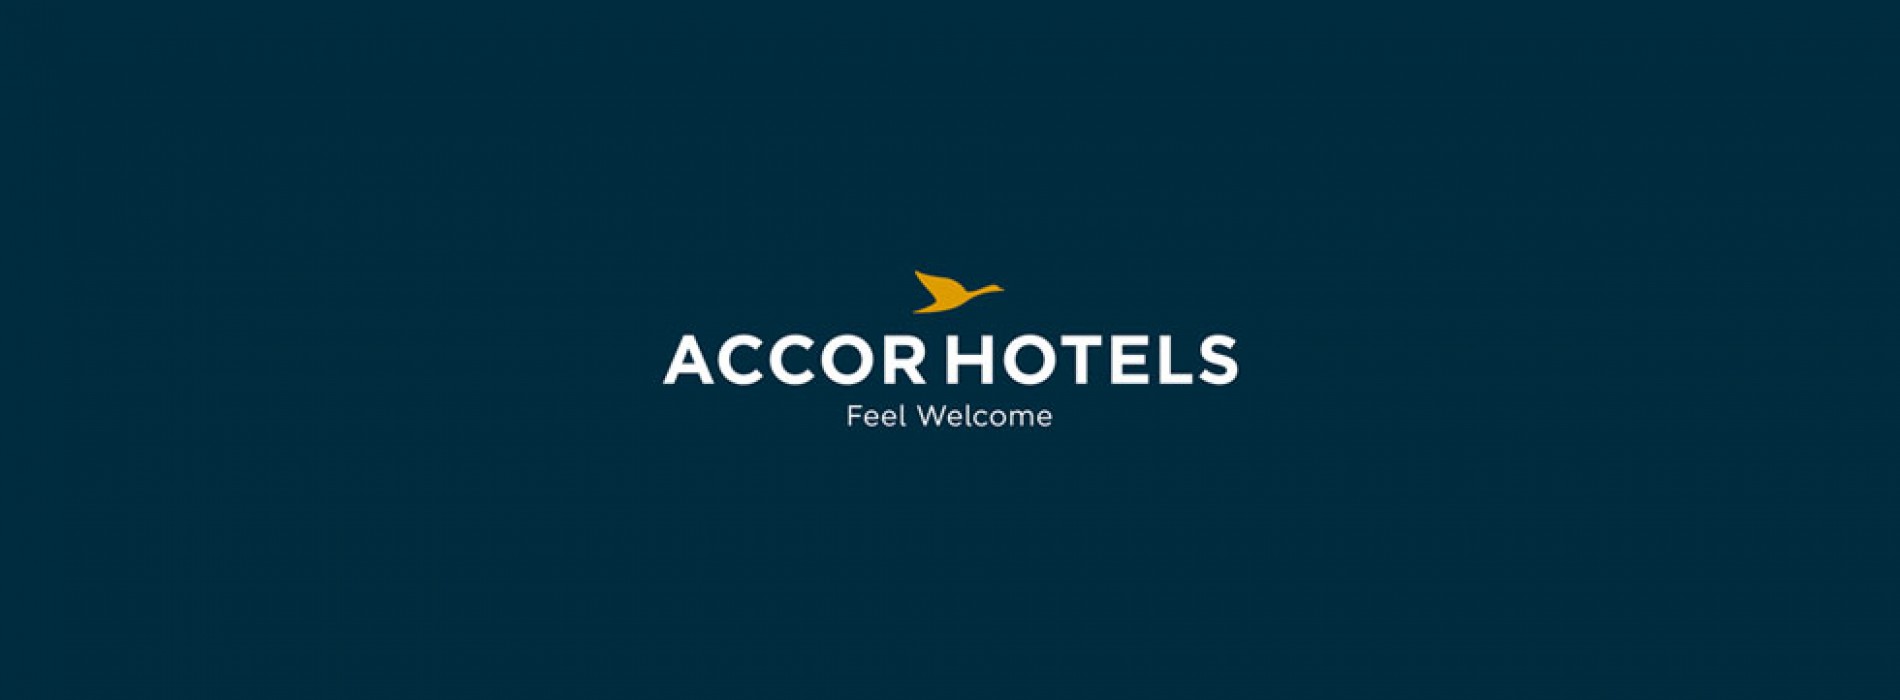 ACCOR HOTELS’ EXCLUSIVE HOSPITALITY PARTNERSHIP WITH DELHI DAREDEVILS